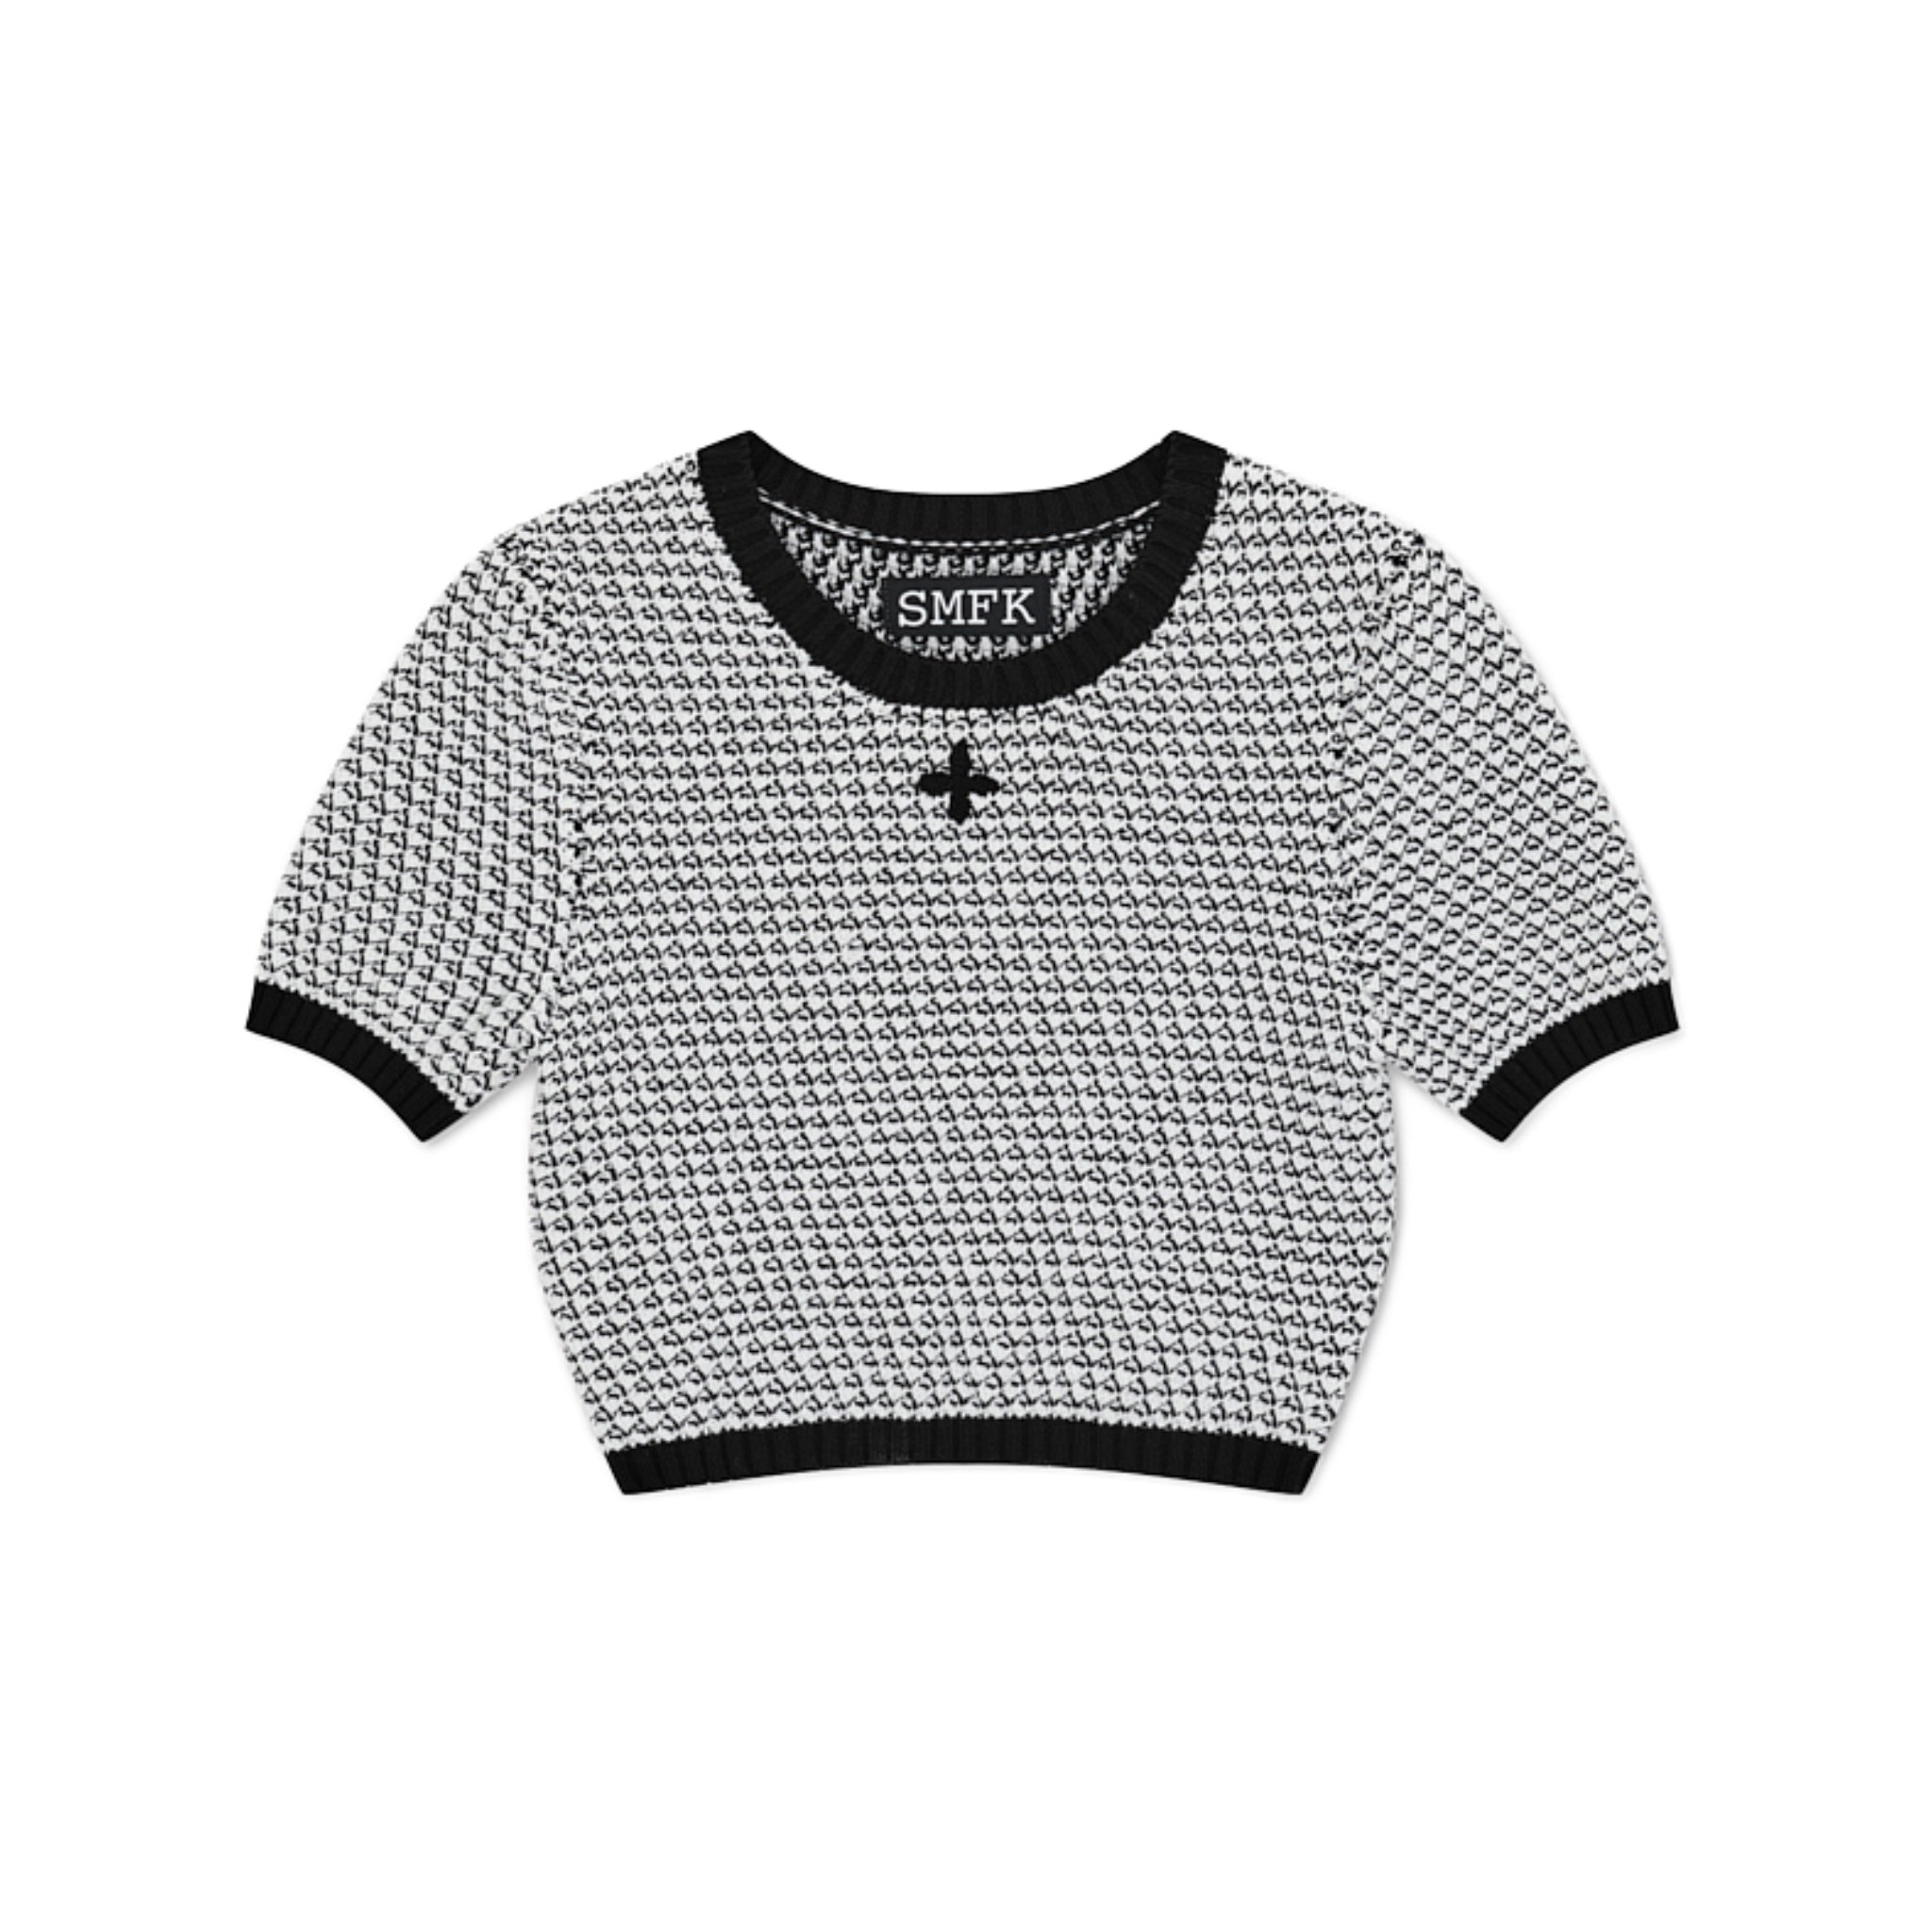 SMFK Compass Camouflage Chainmail Knit Short Tee | MADA IN CHINA